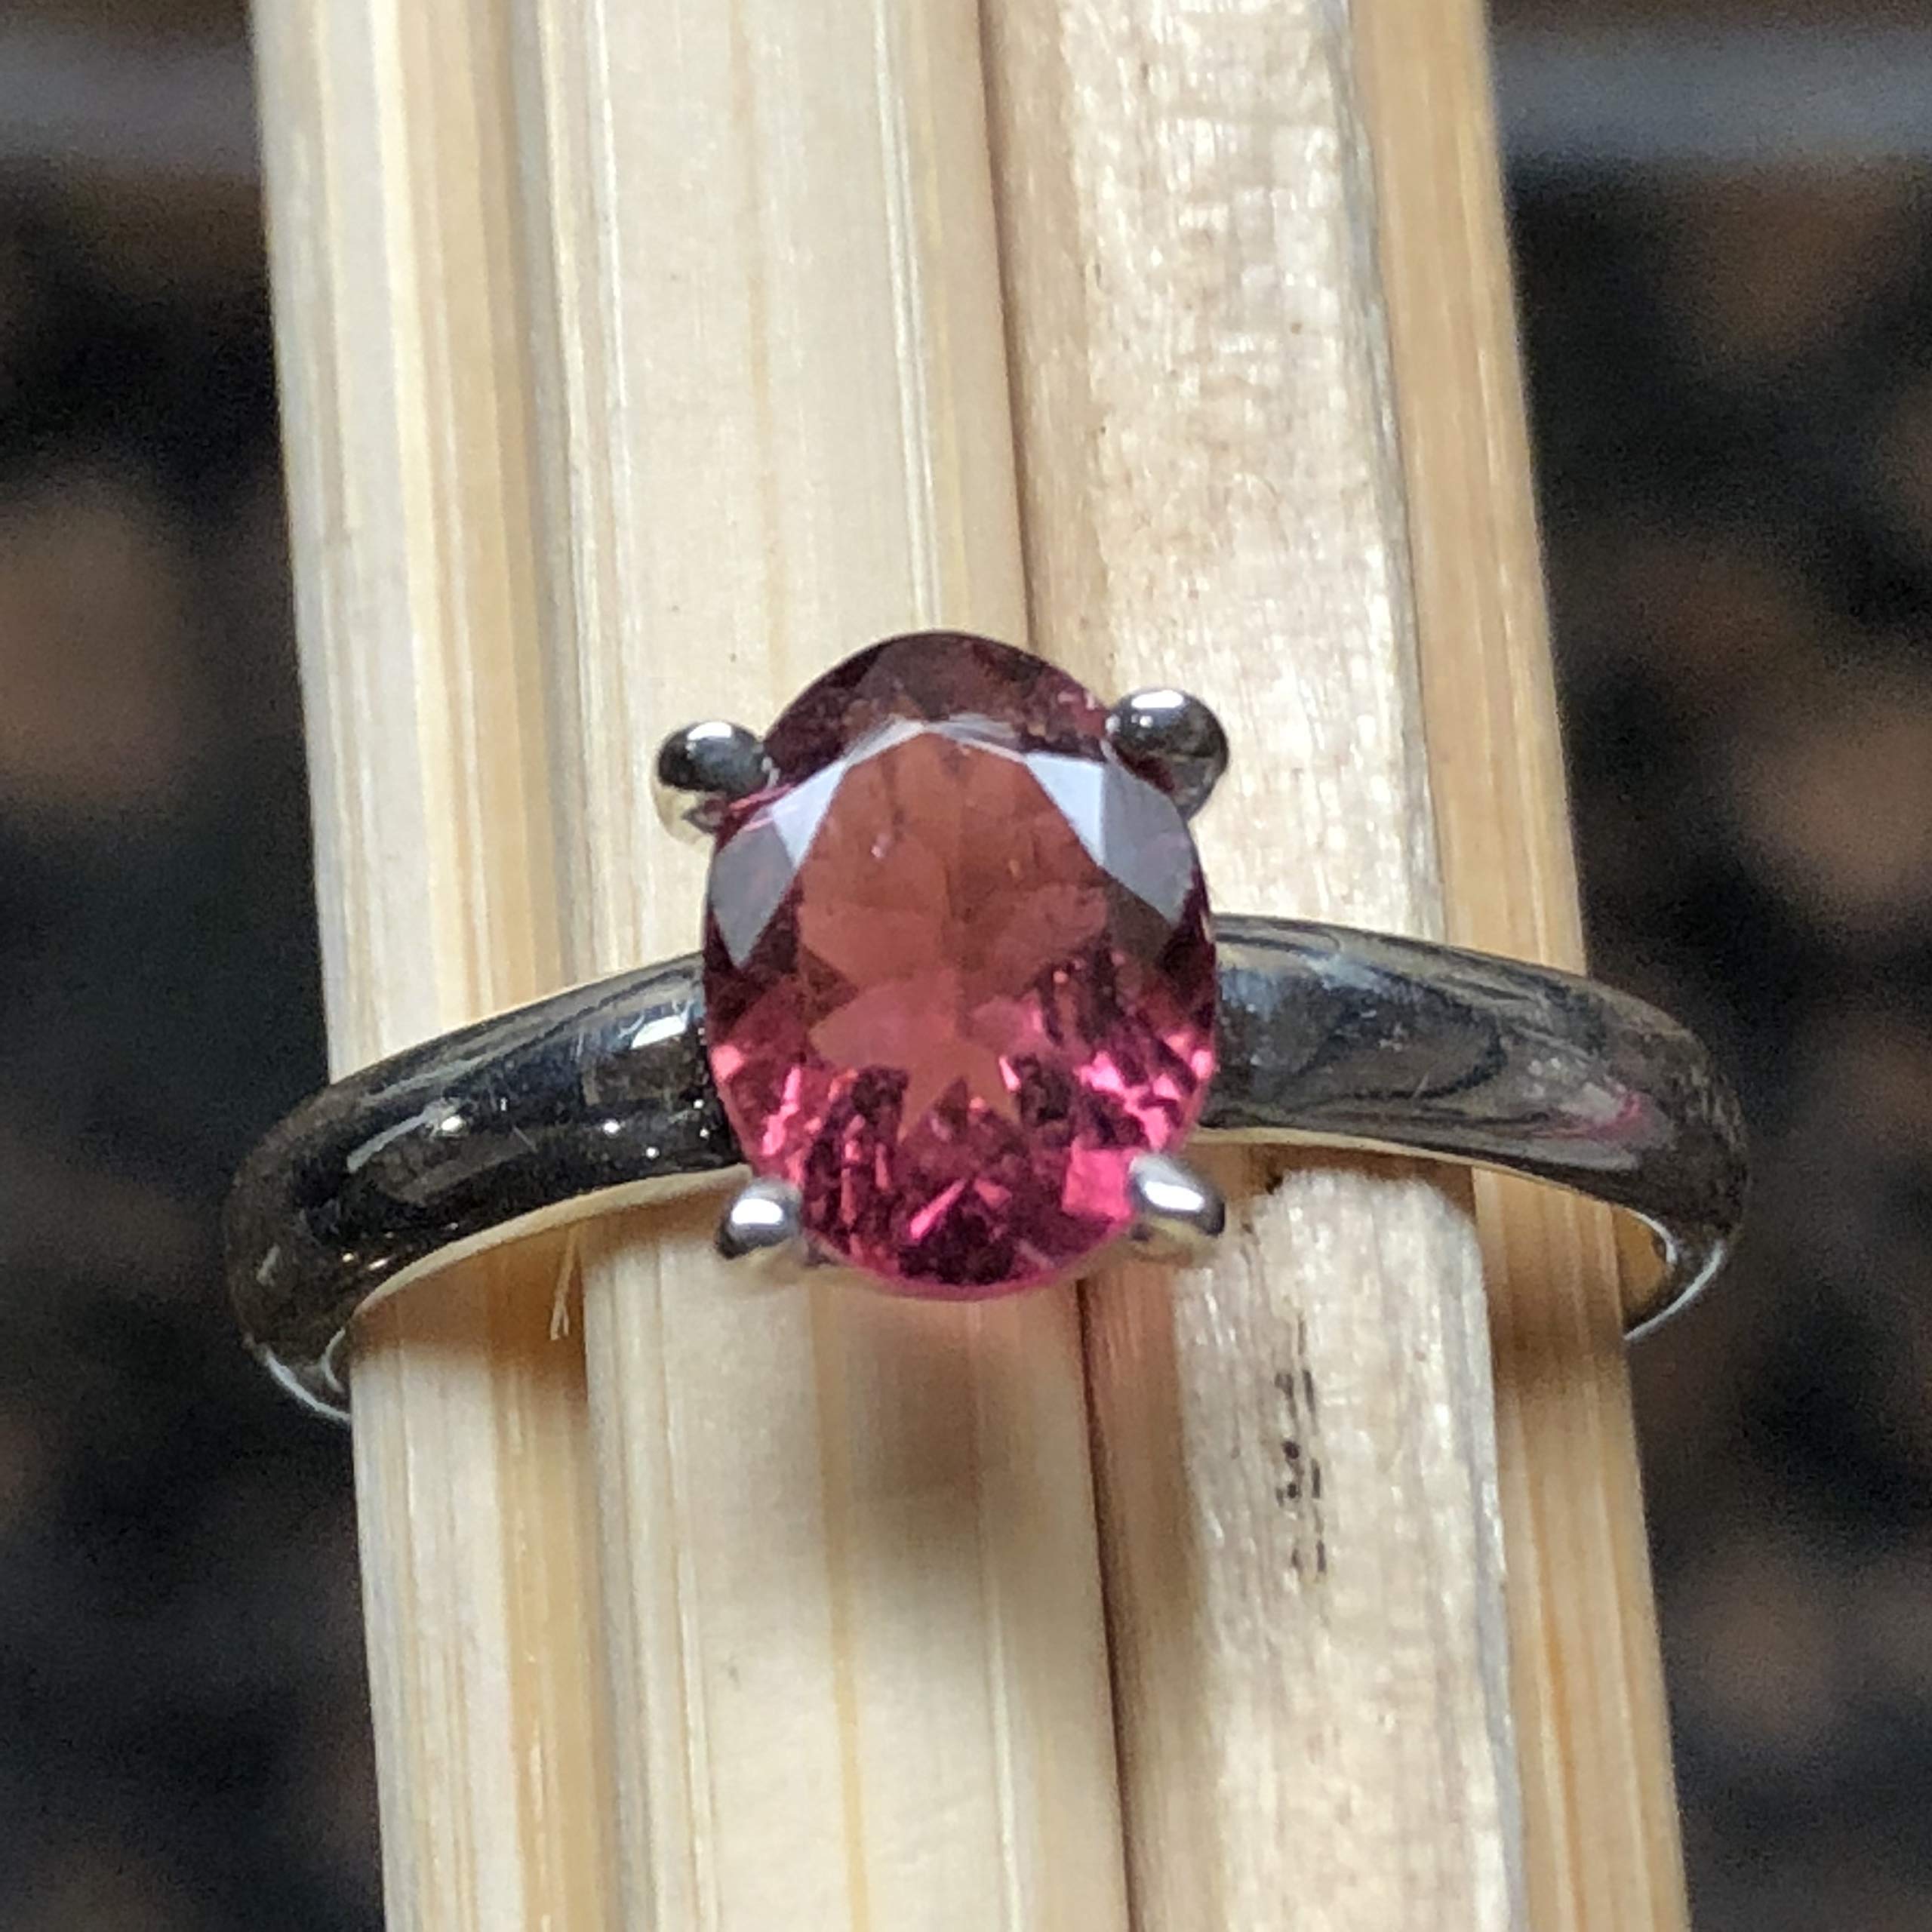 Natural Rubellite Tourmaline 925 Solid Sterling Silver Engagement Ring Size 7, 8 - Natural Rocks by Kala